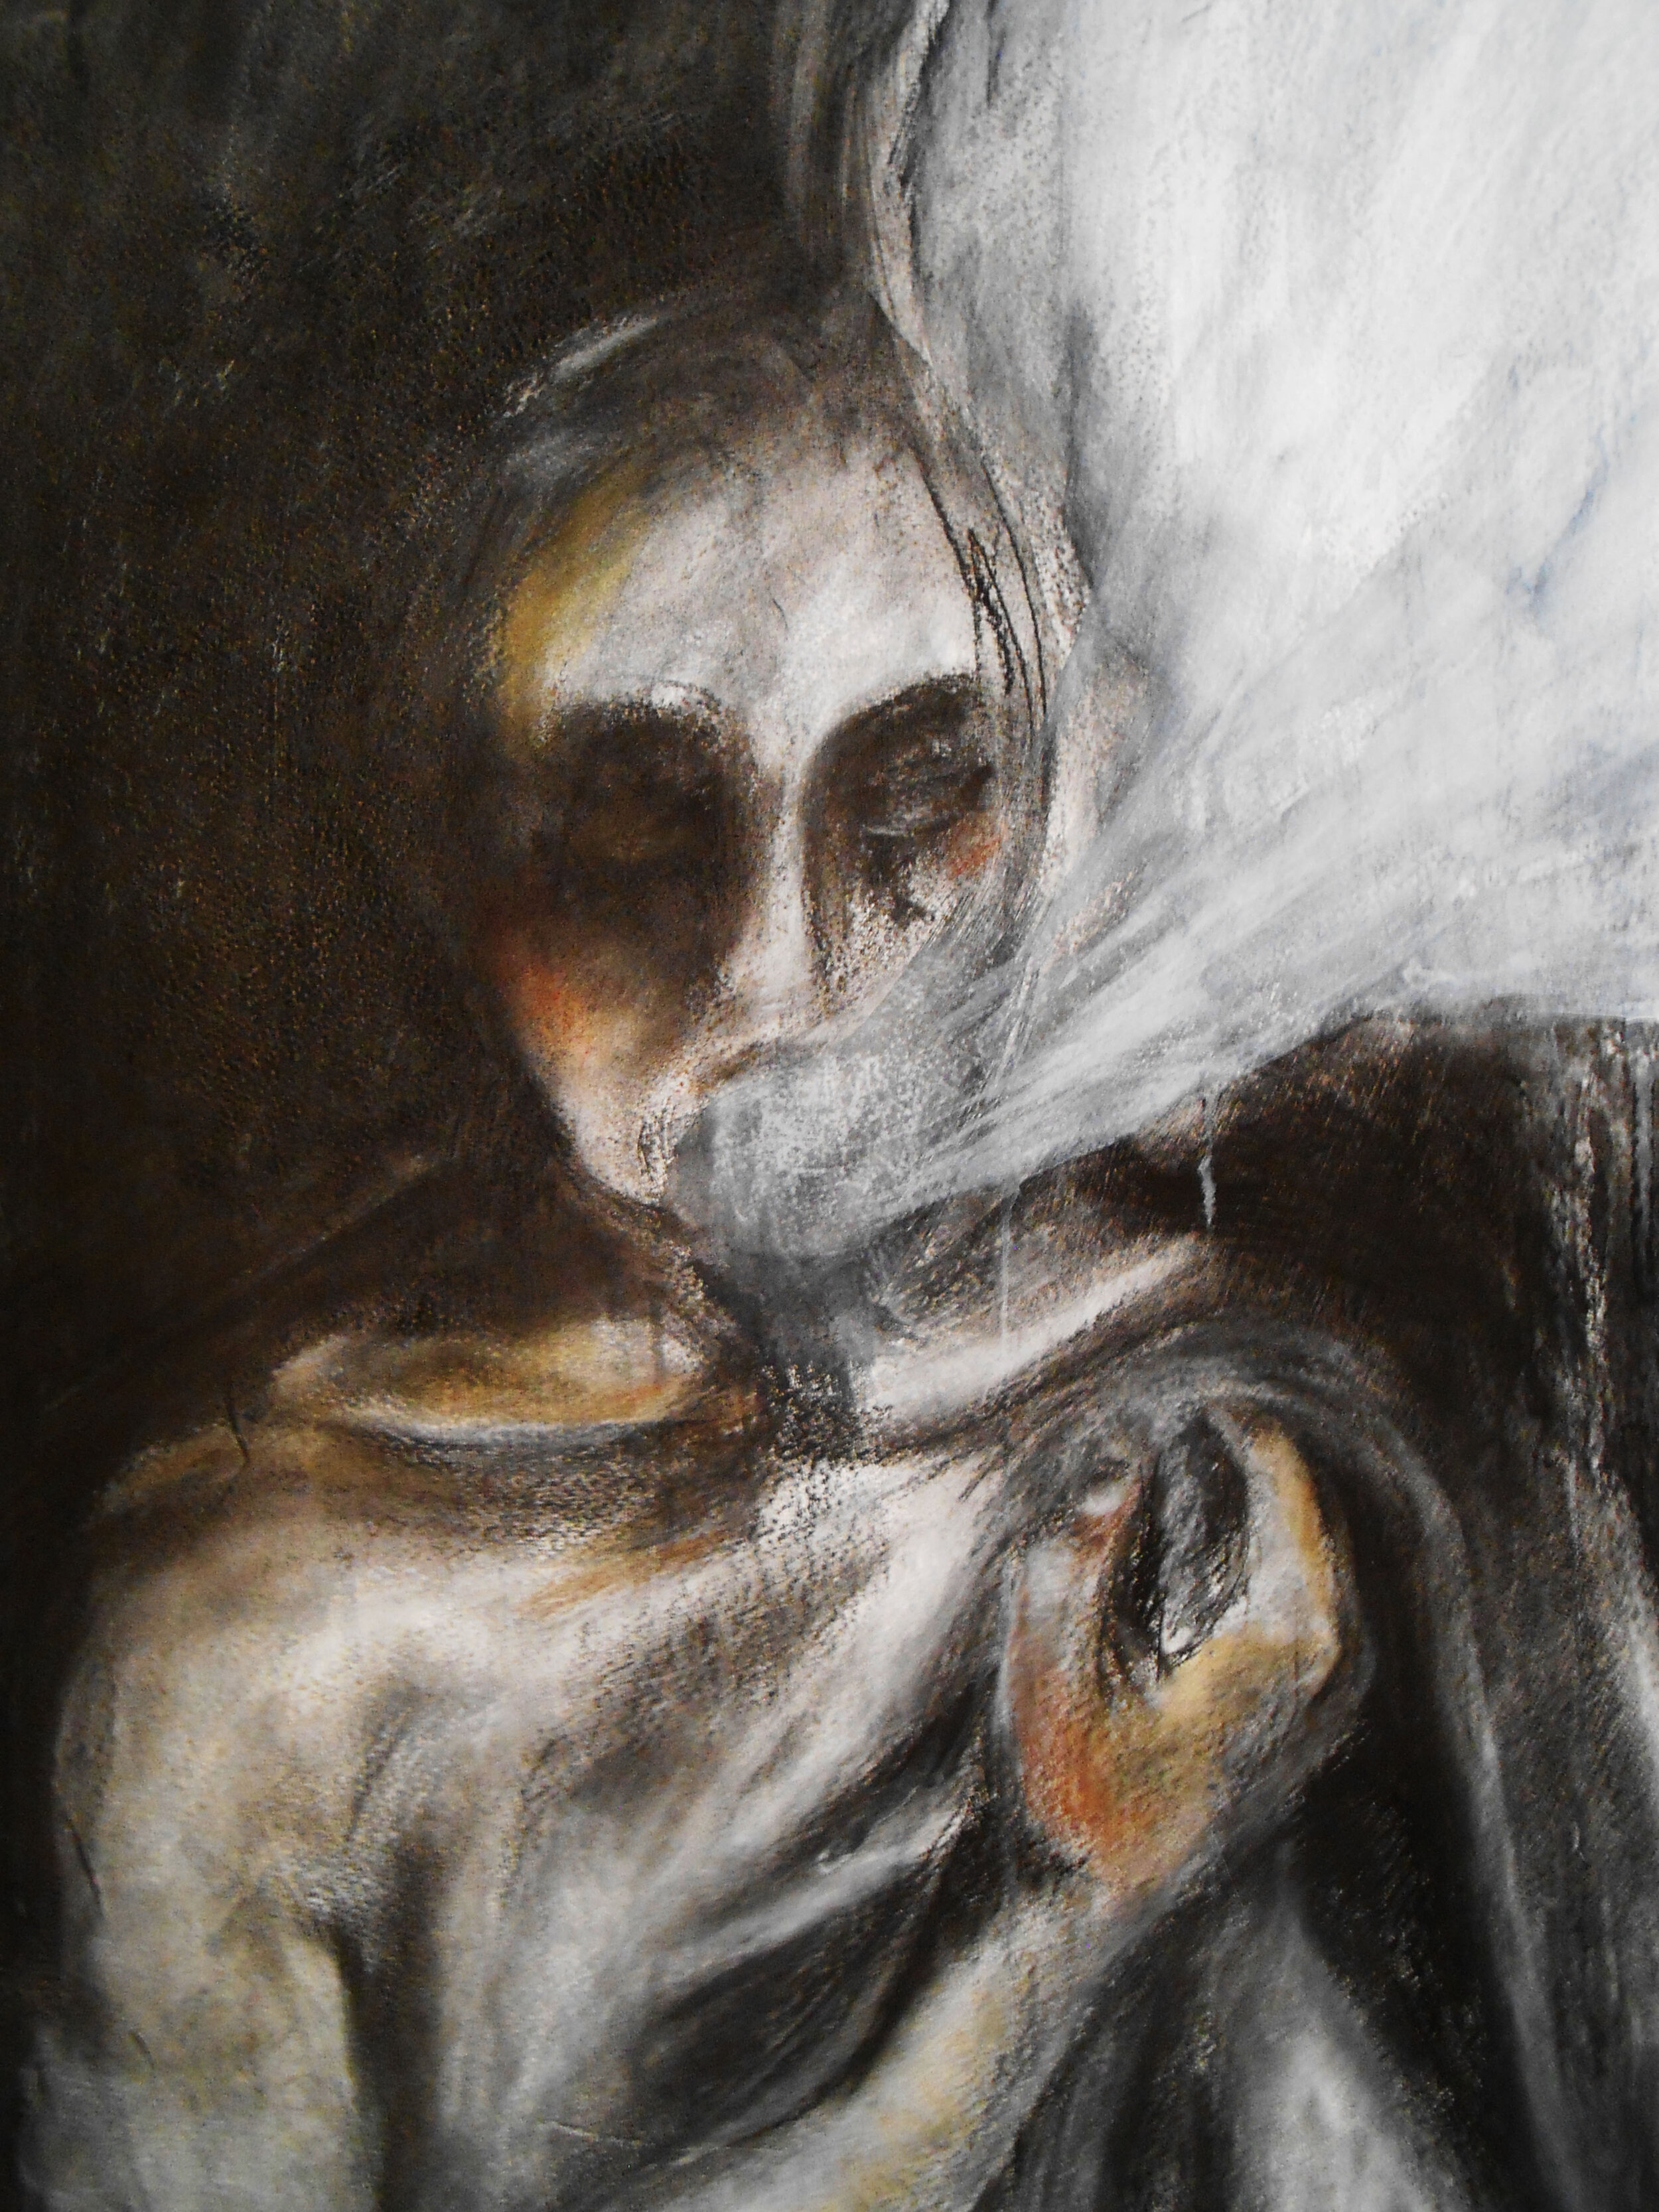  Smoke Figures, charcoal and conte crayon on Fabriano cotton sheet, 2013. 